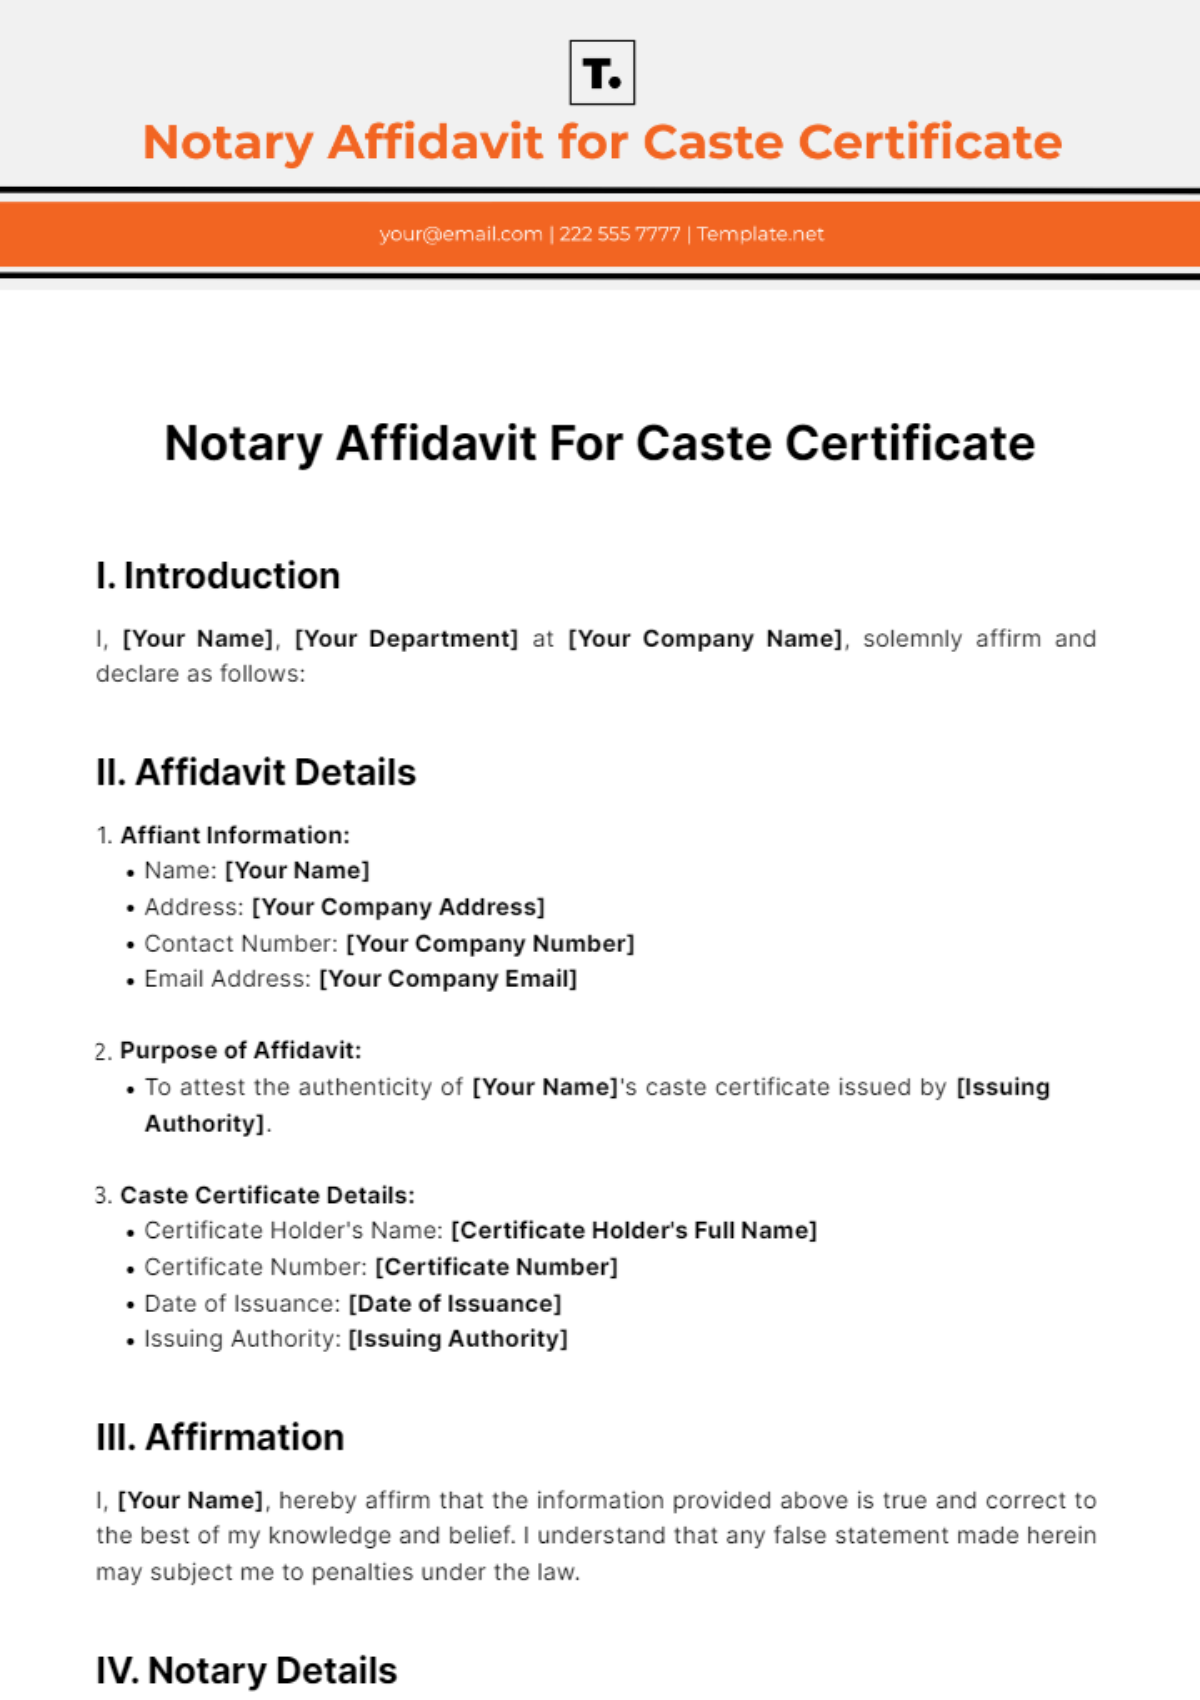 Free Notary Affidavit For Caste Certificate Template